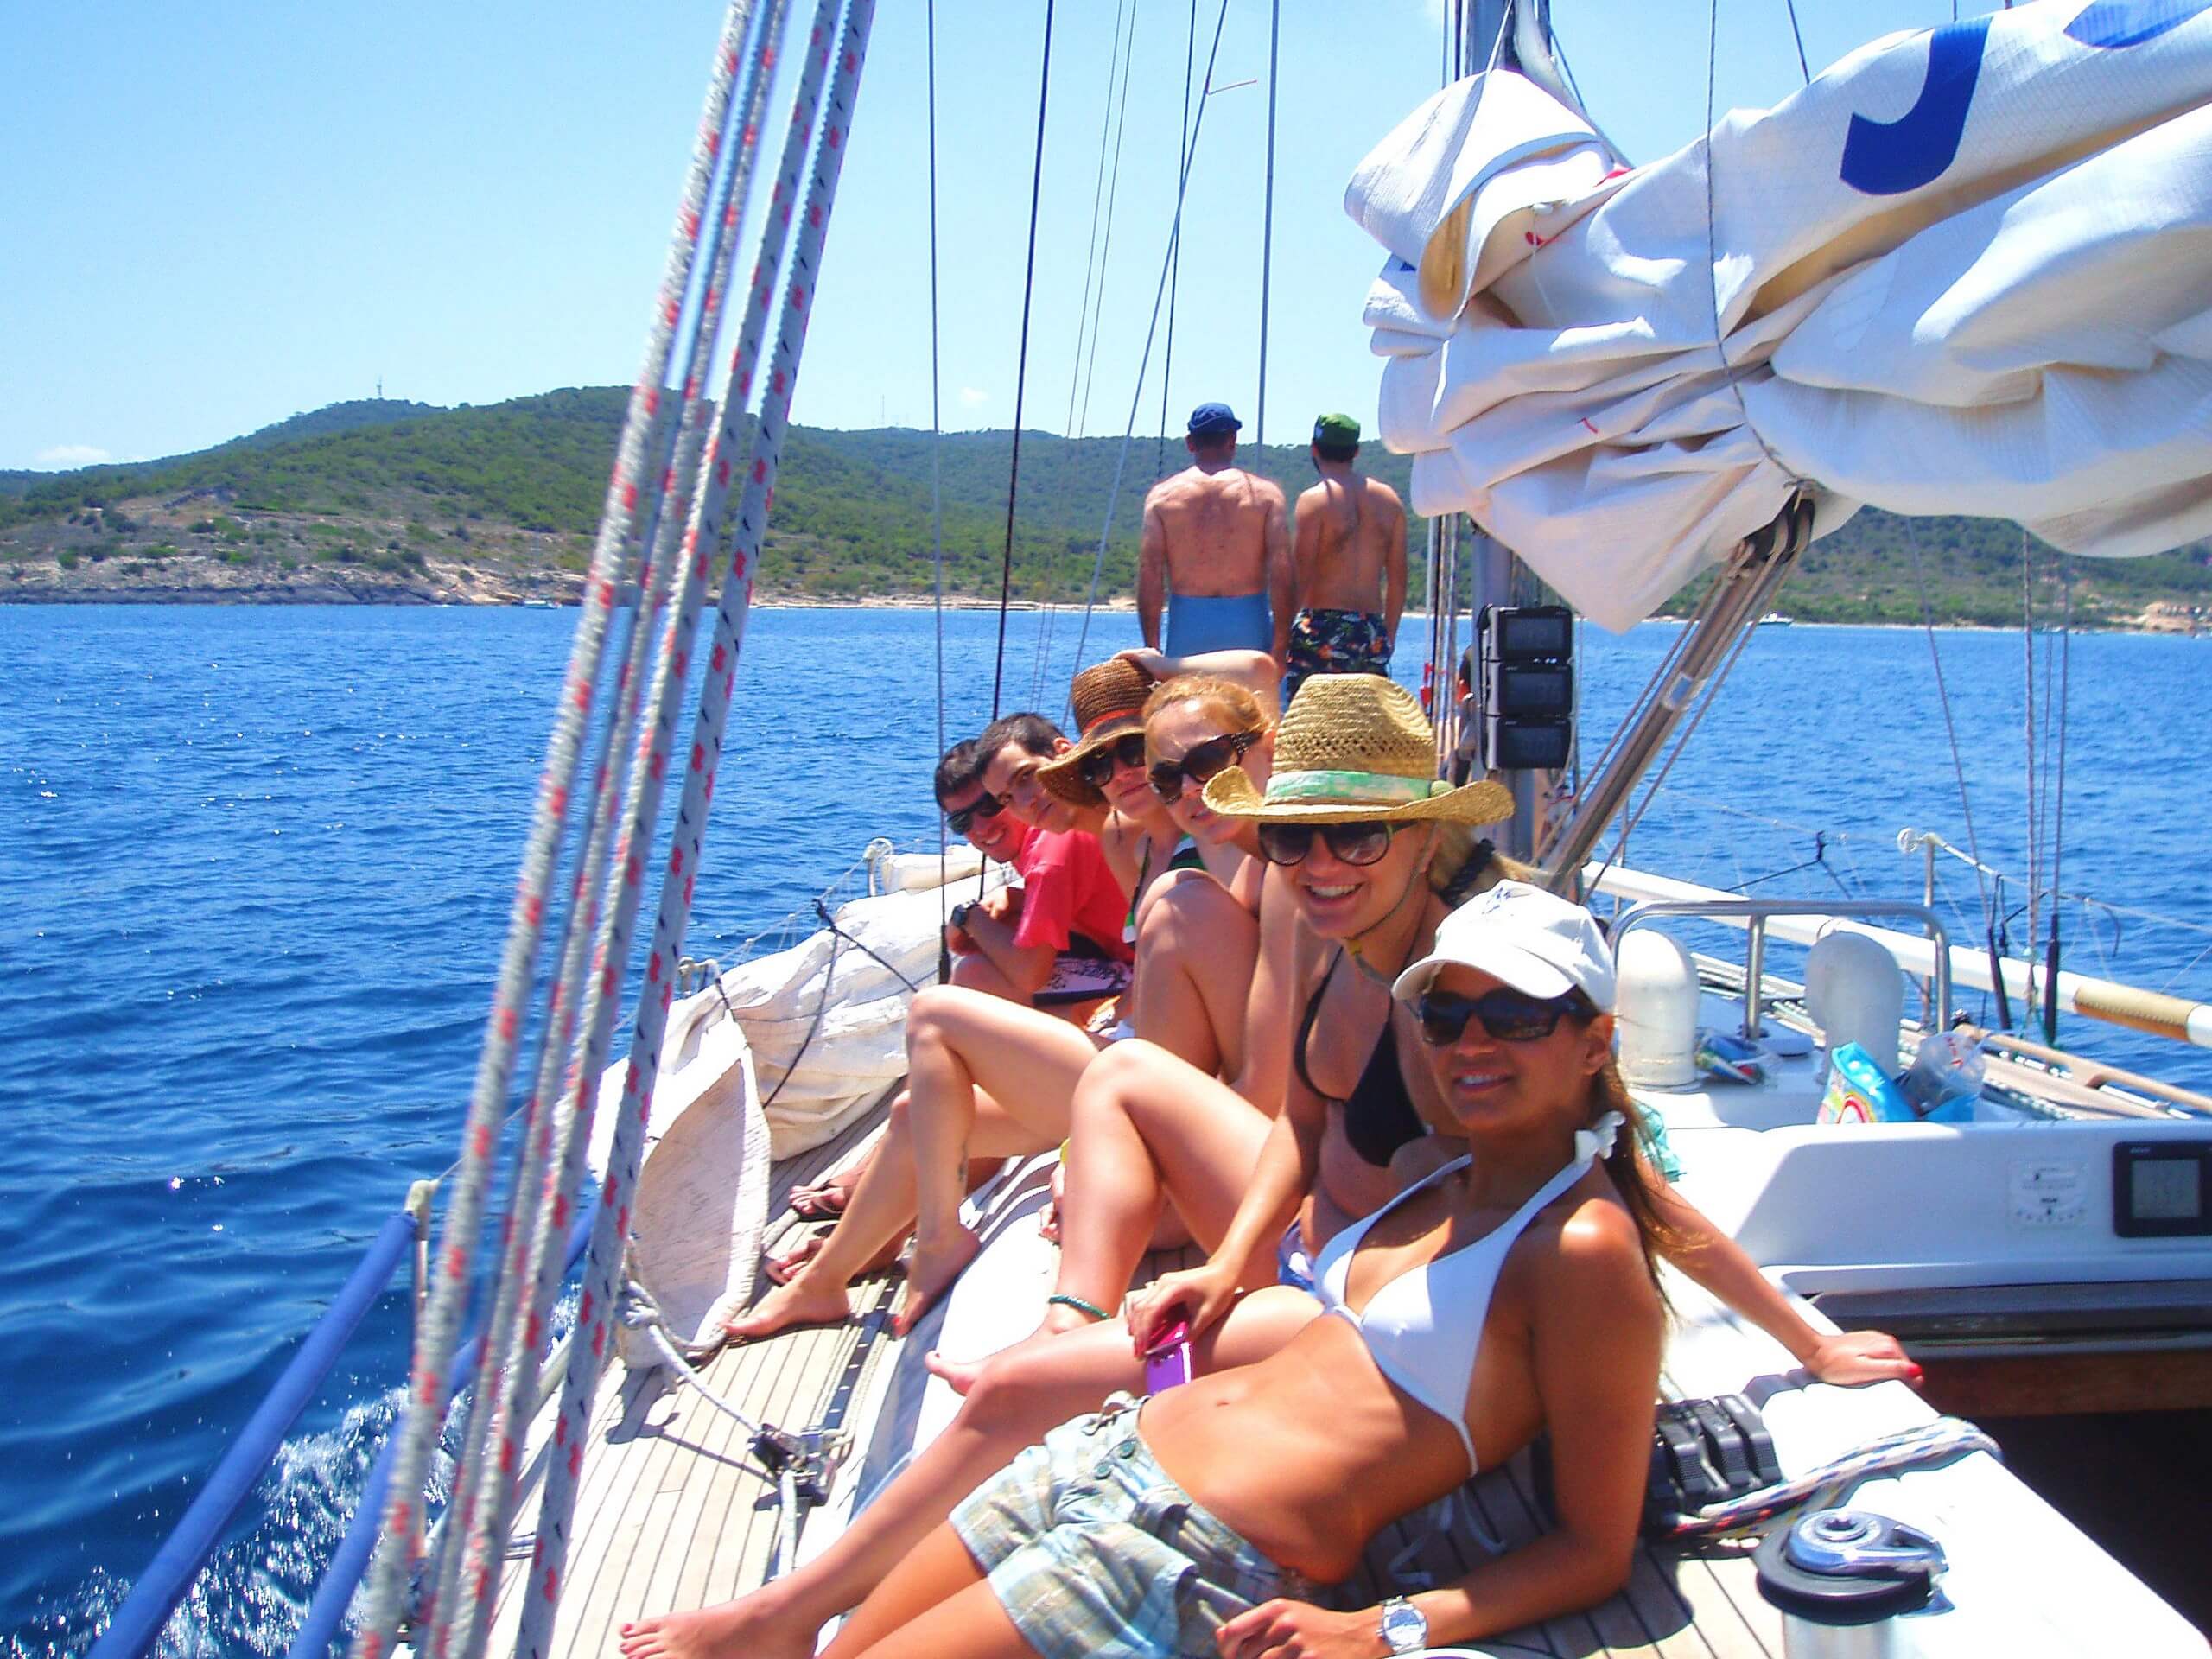 Group of friends posing on a yacht deck while on sailing adventure